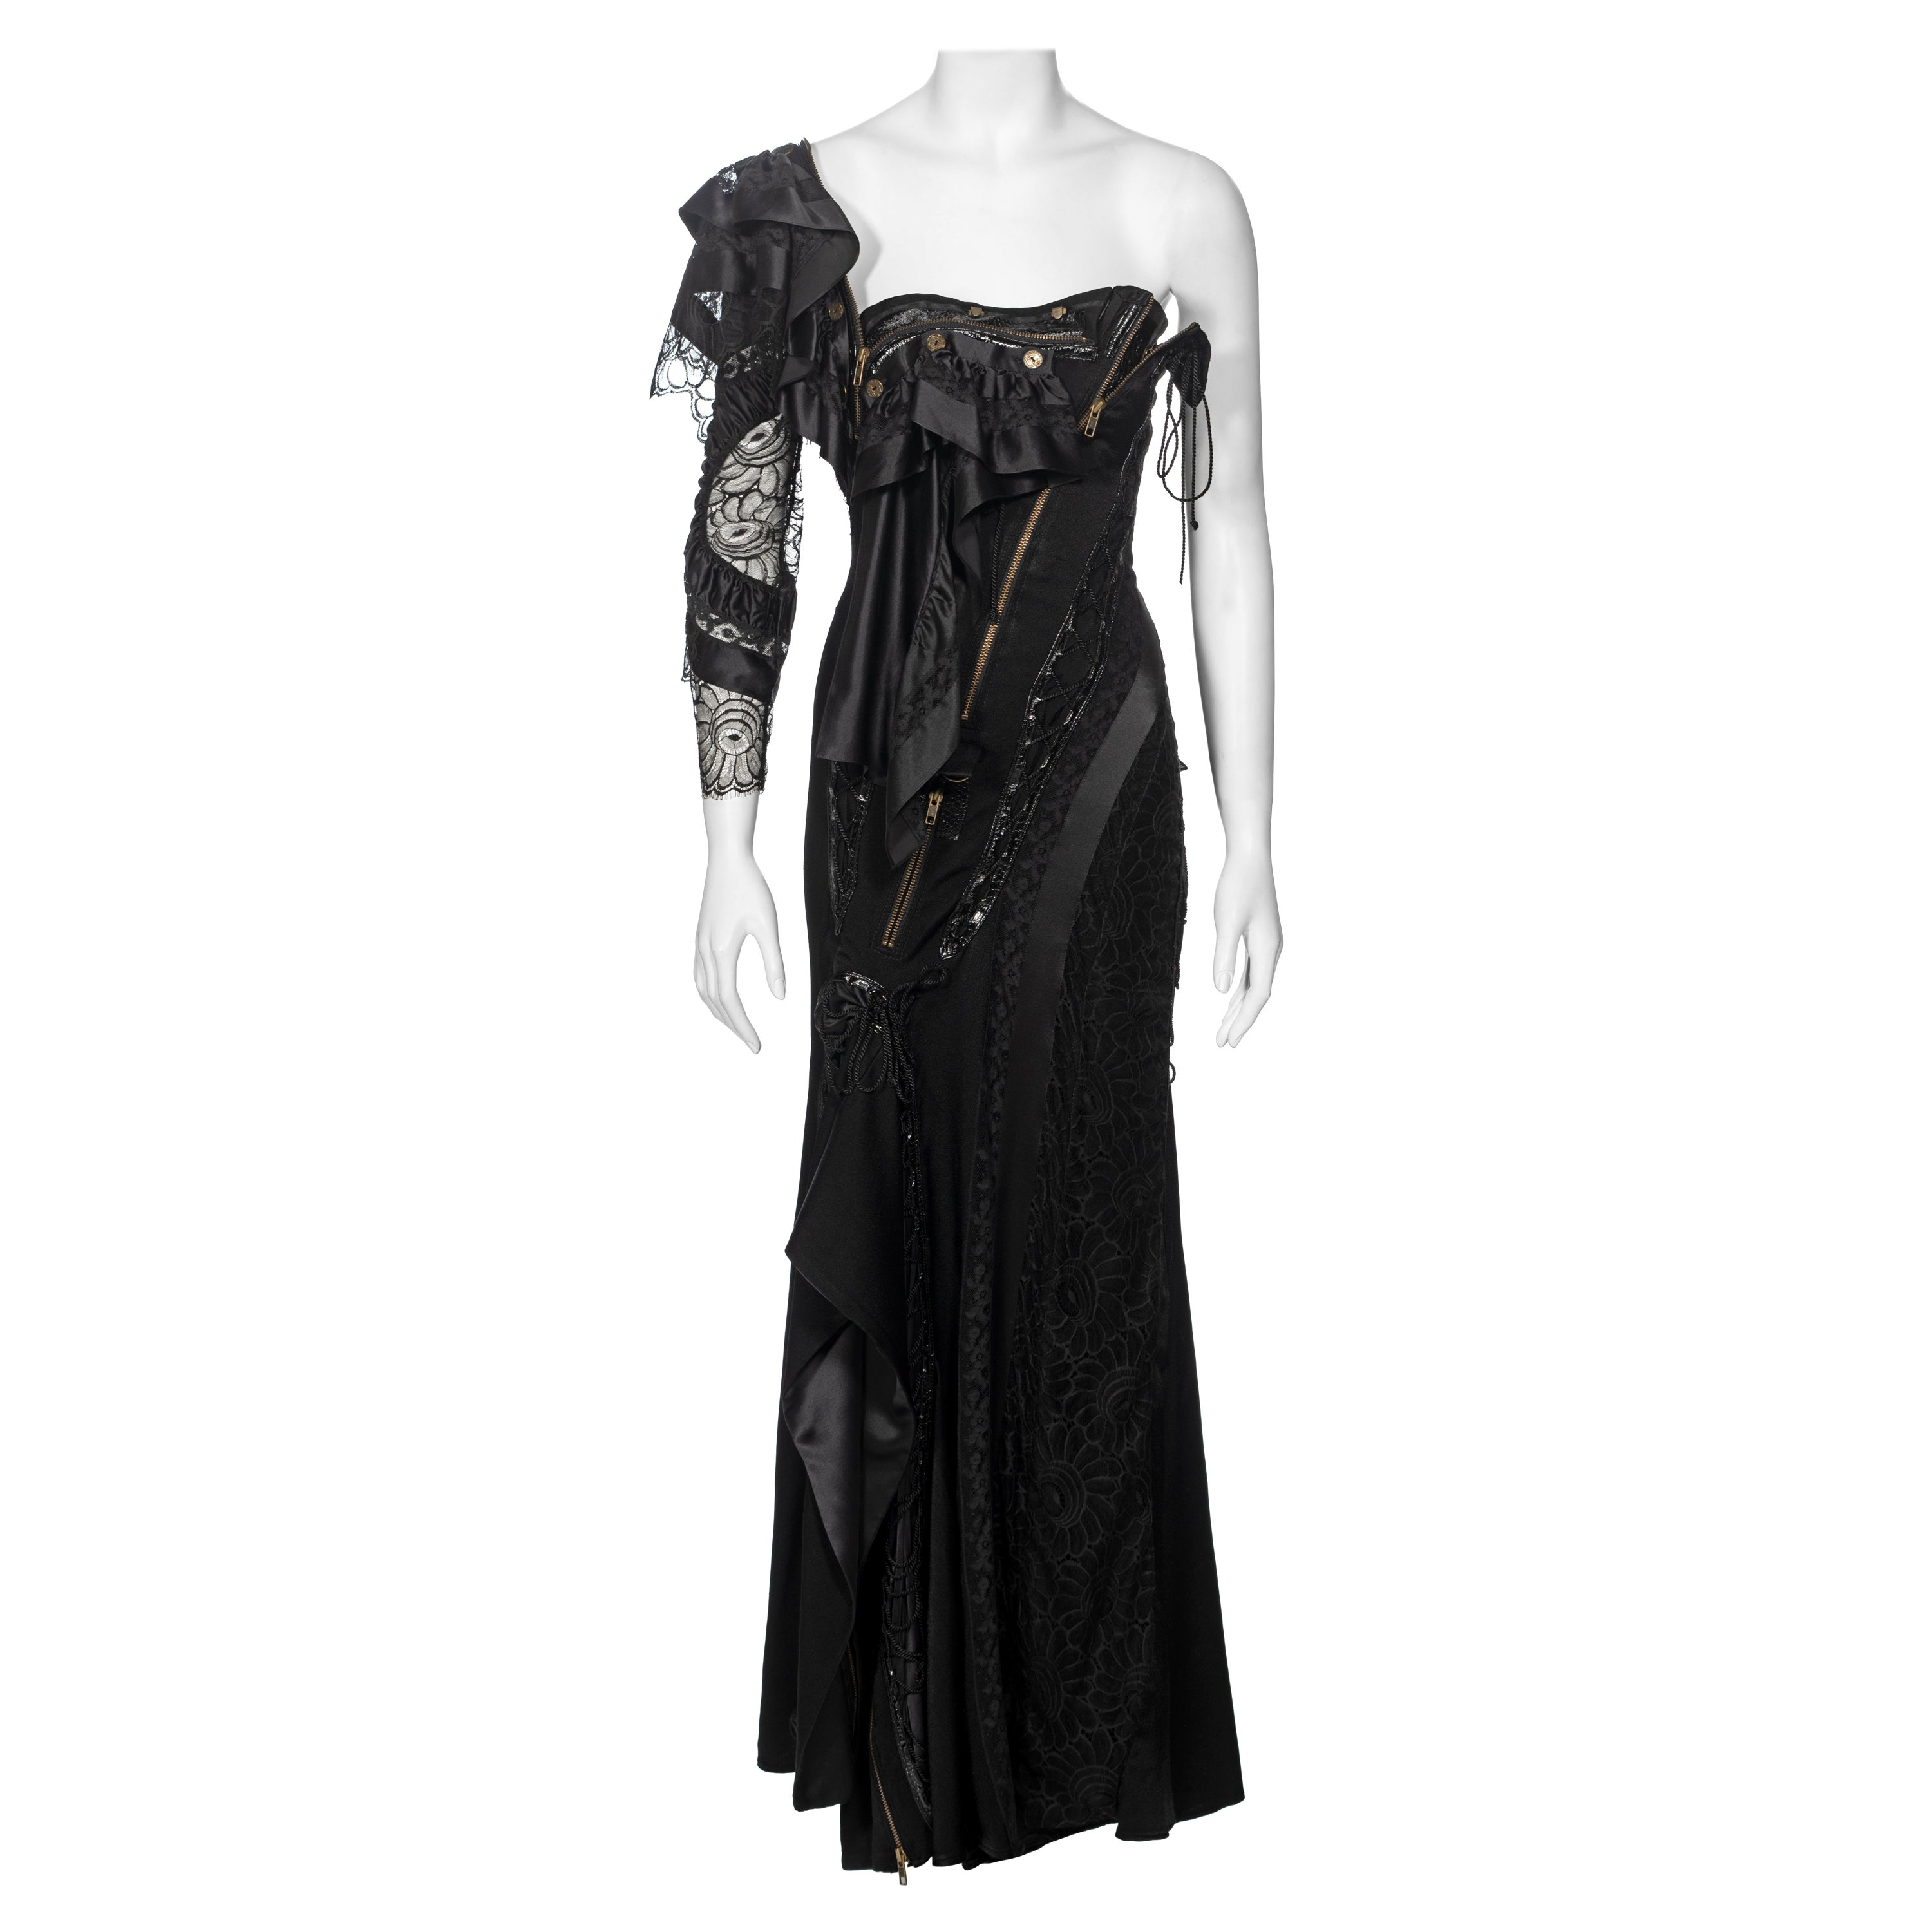 John Galliano Black Deconstructed Silk and Lace Evening Dress, ss 2002 For Sale